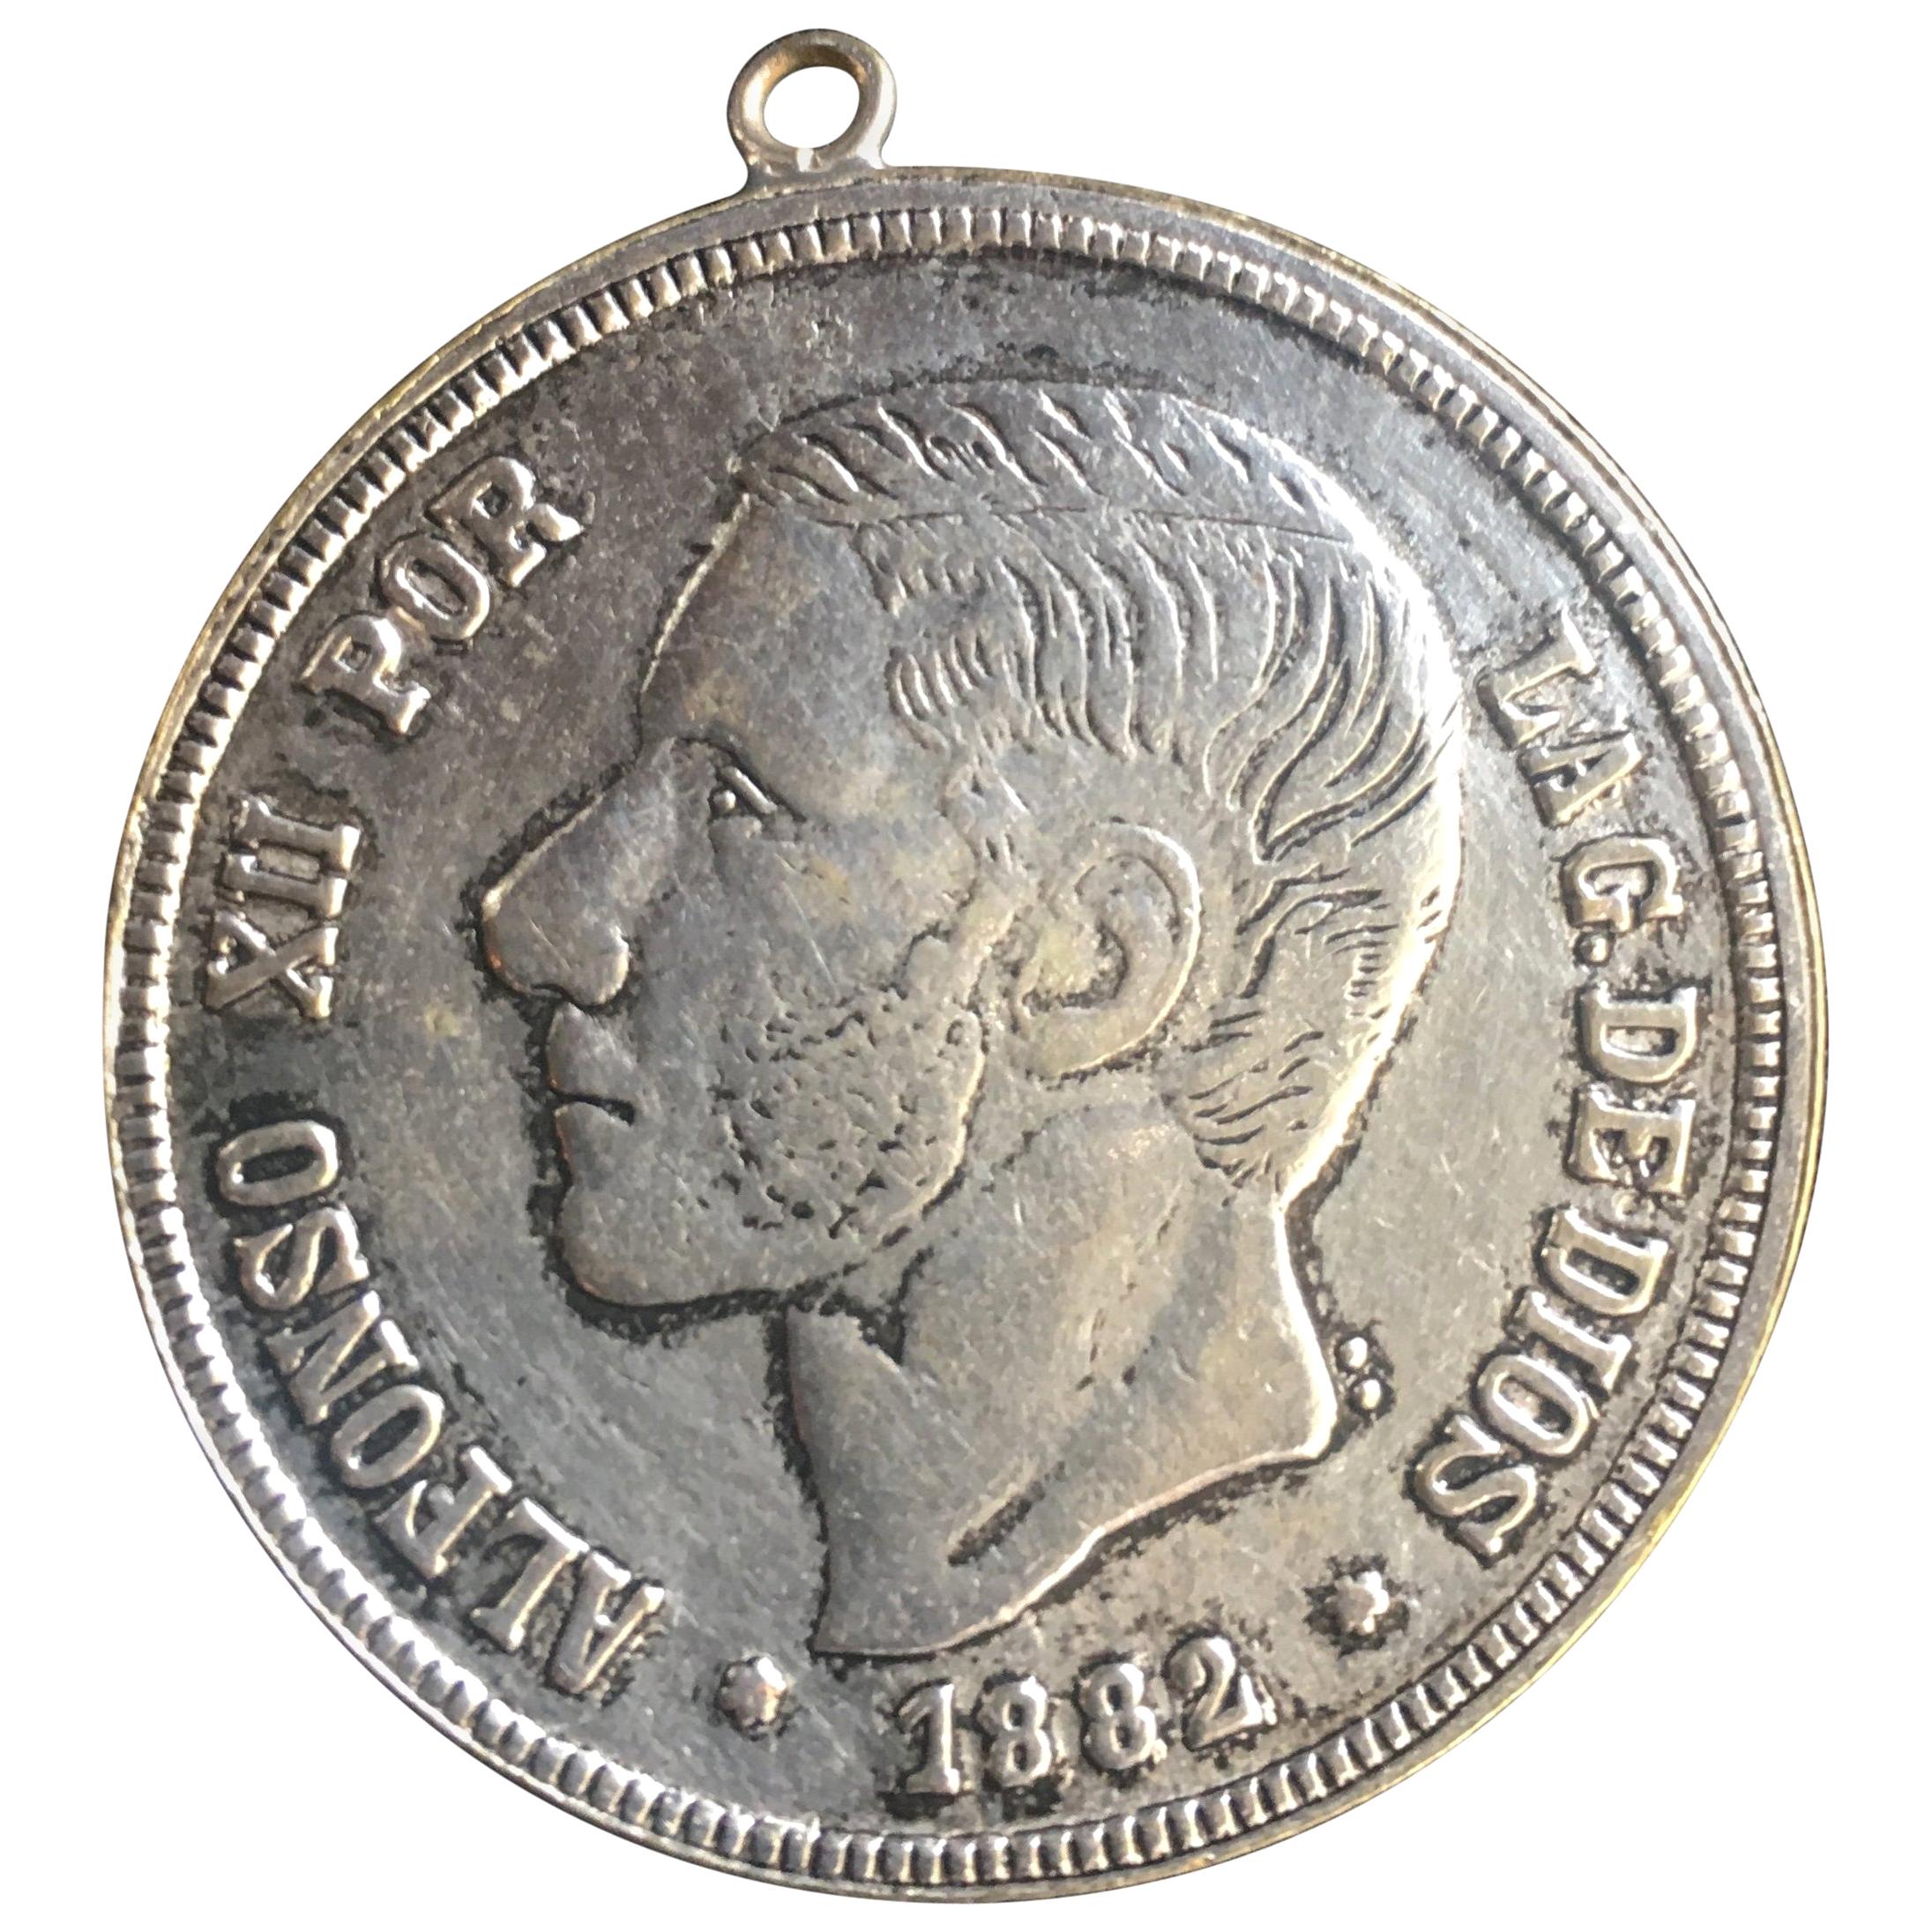 Antique Spanish Coin Dated 1882 For Sale